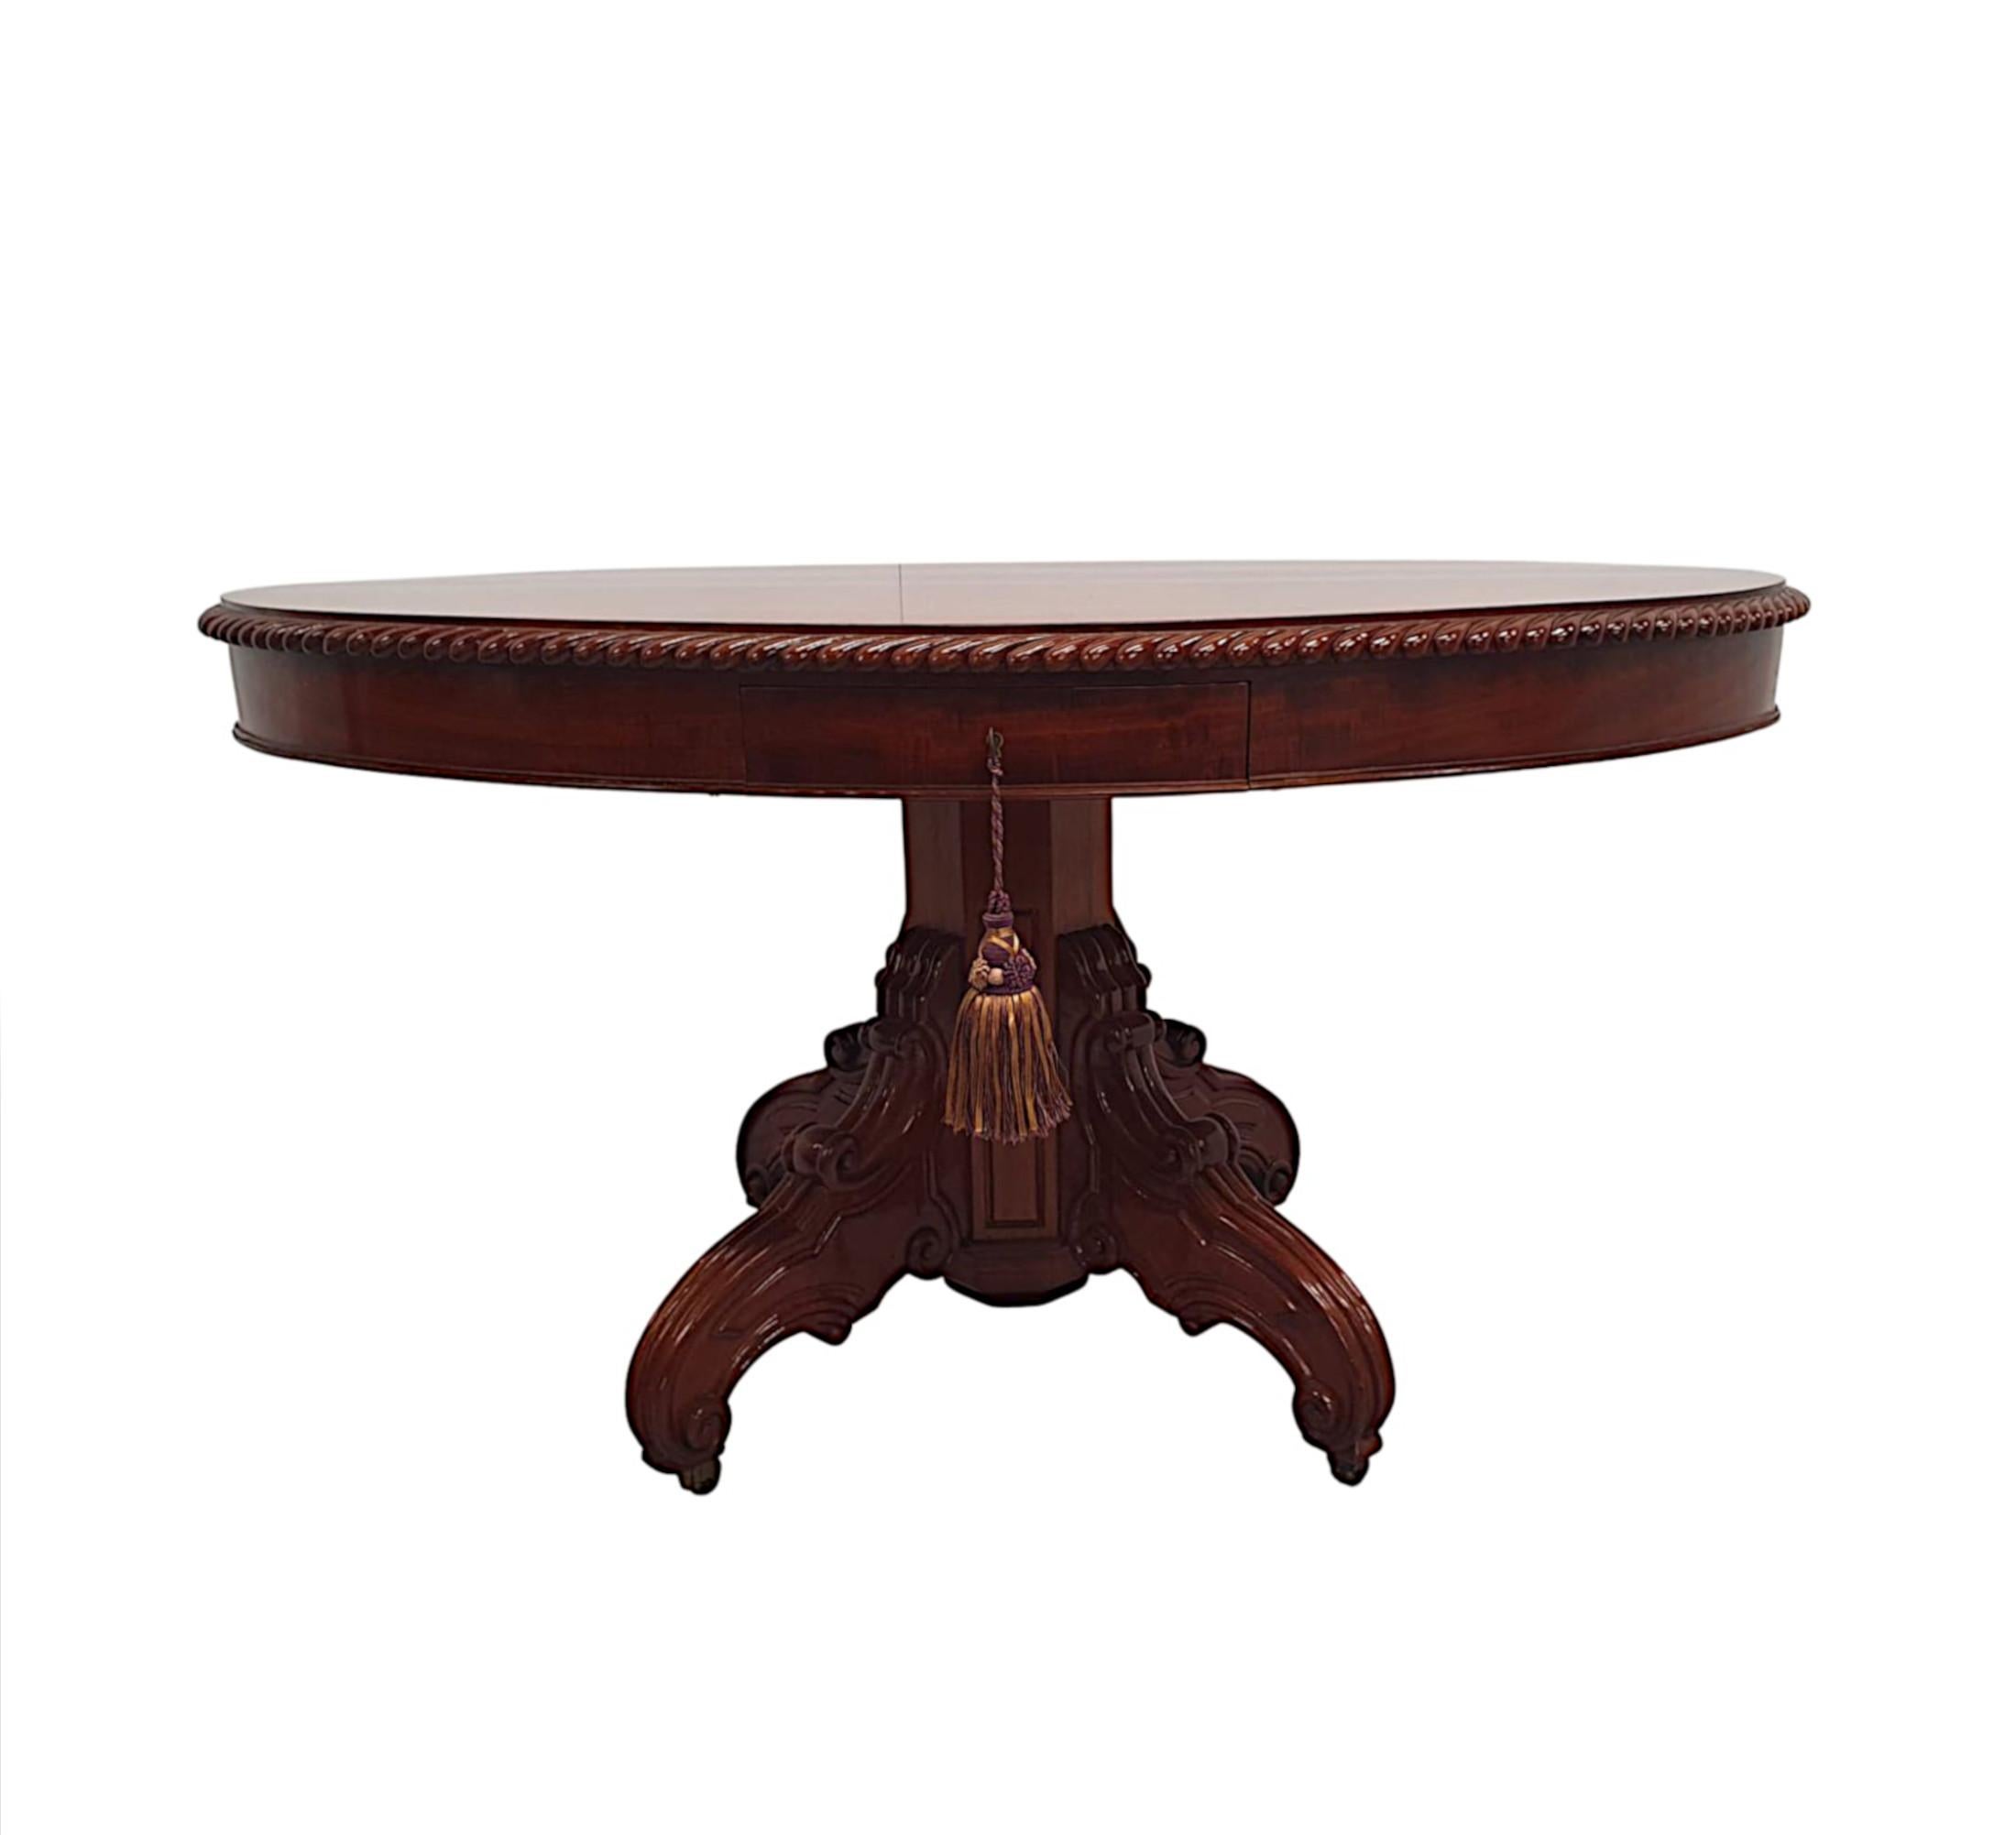 English A Rare 19th Century Figured Mahogany Oval Drum Table  For Sale